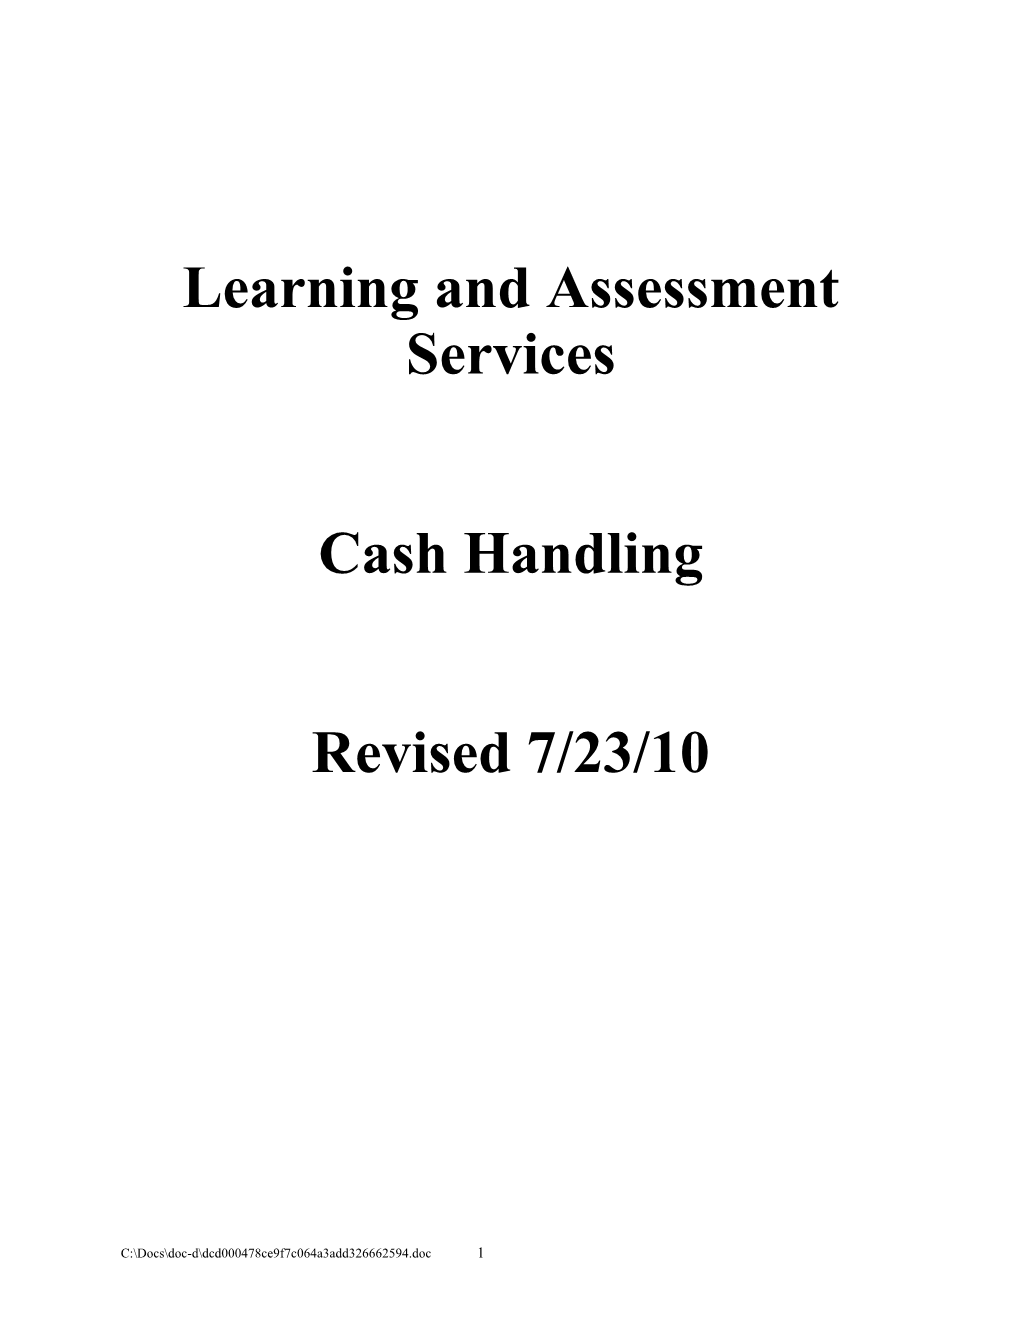 Learning and Assessment Services